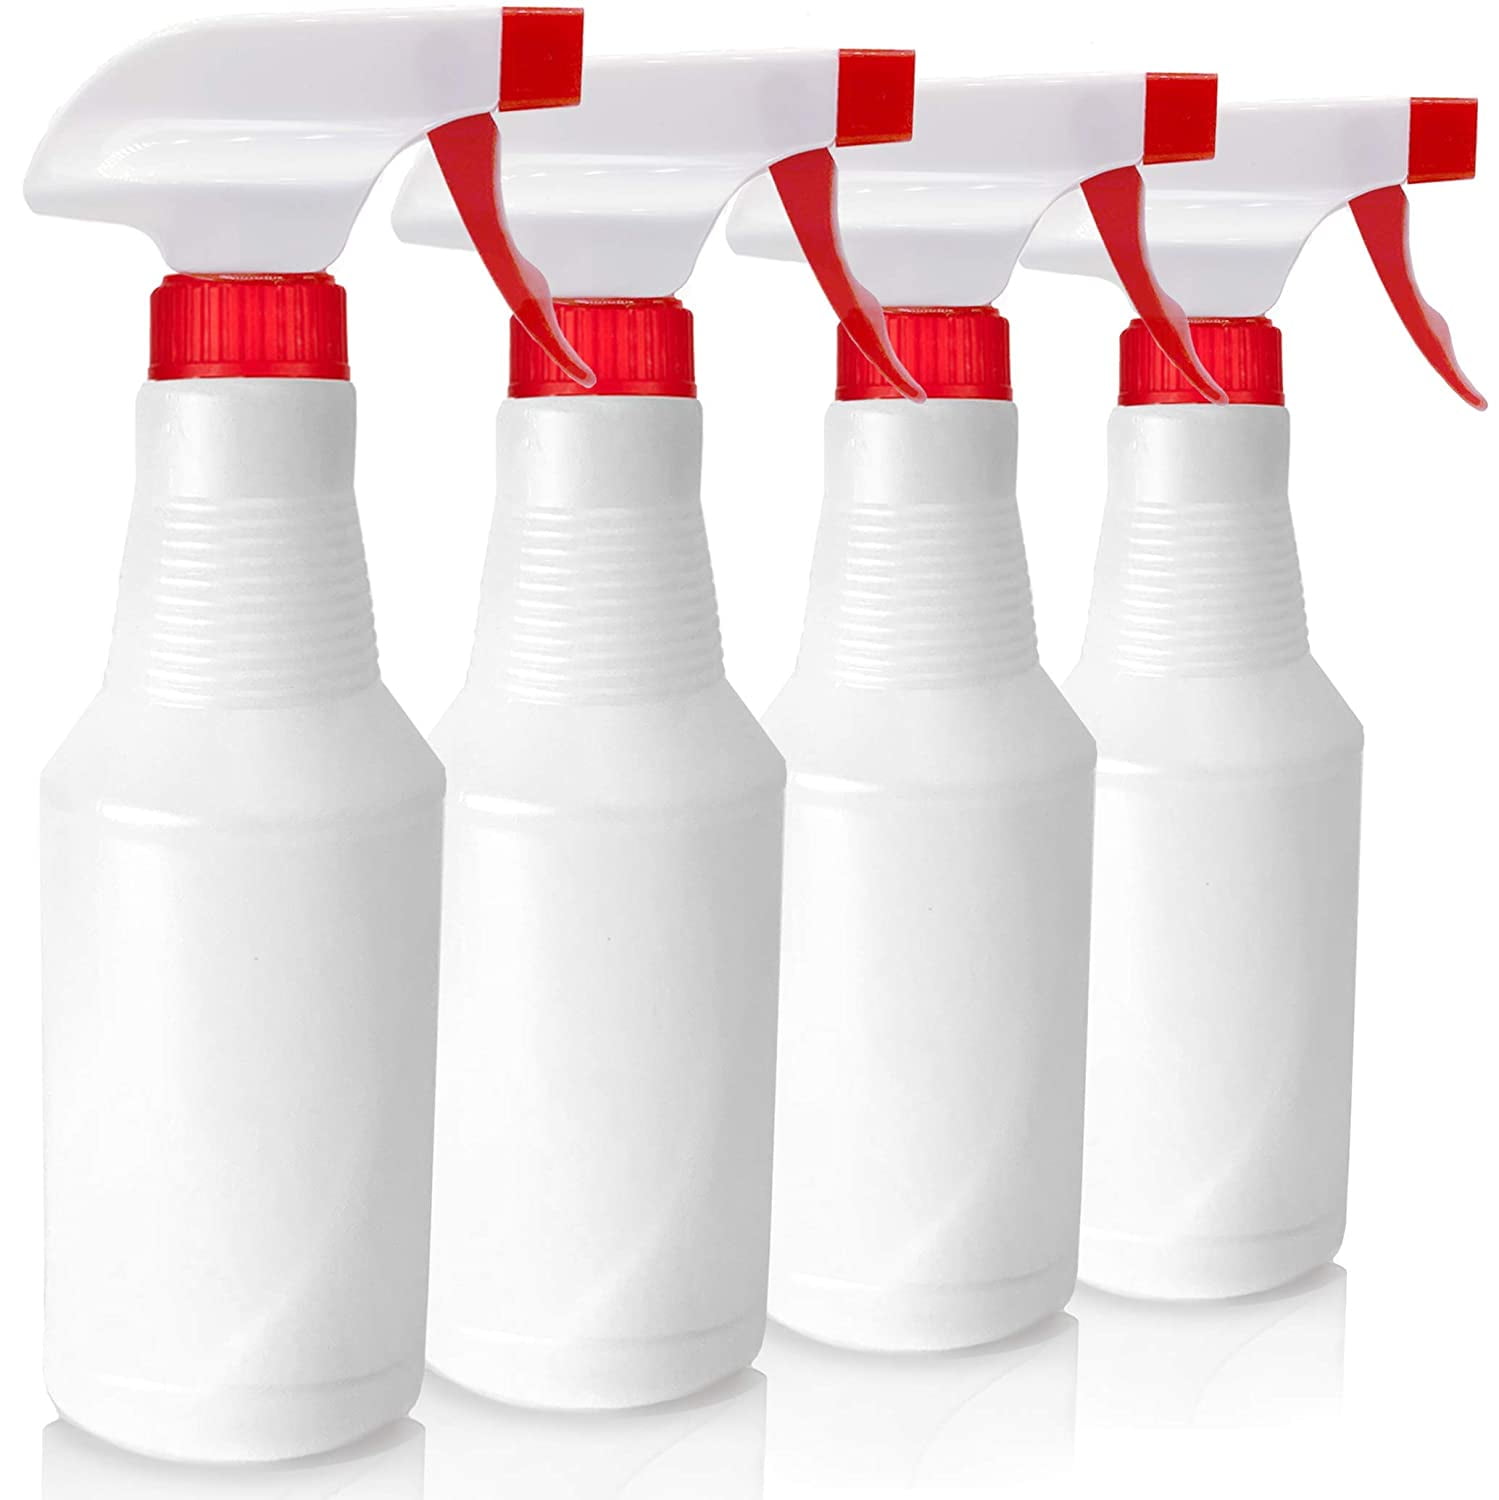 for Cleaning Solutions Cooking Adjustable Nozzle Plastic Spray Bottles 4pcs 16oz Empty Clear Spray Bottle with Black Trigger Sprayers Planting 